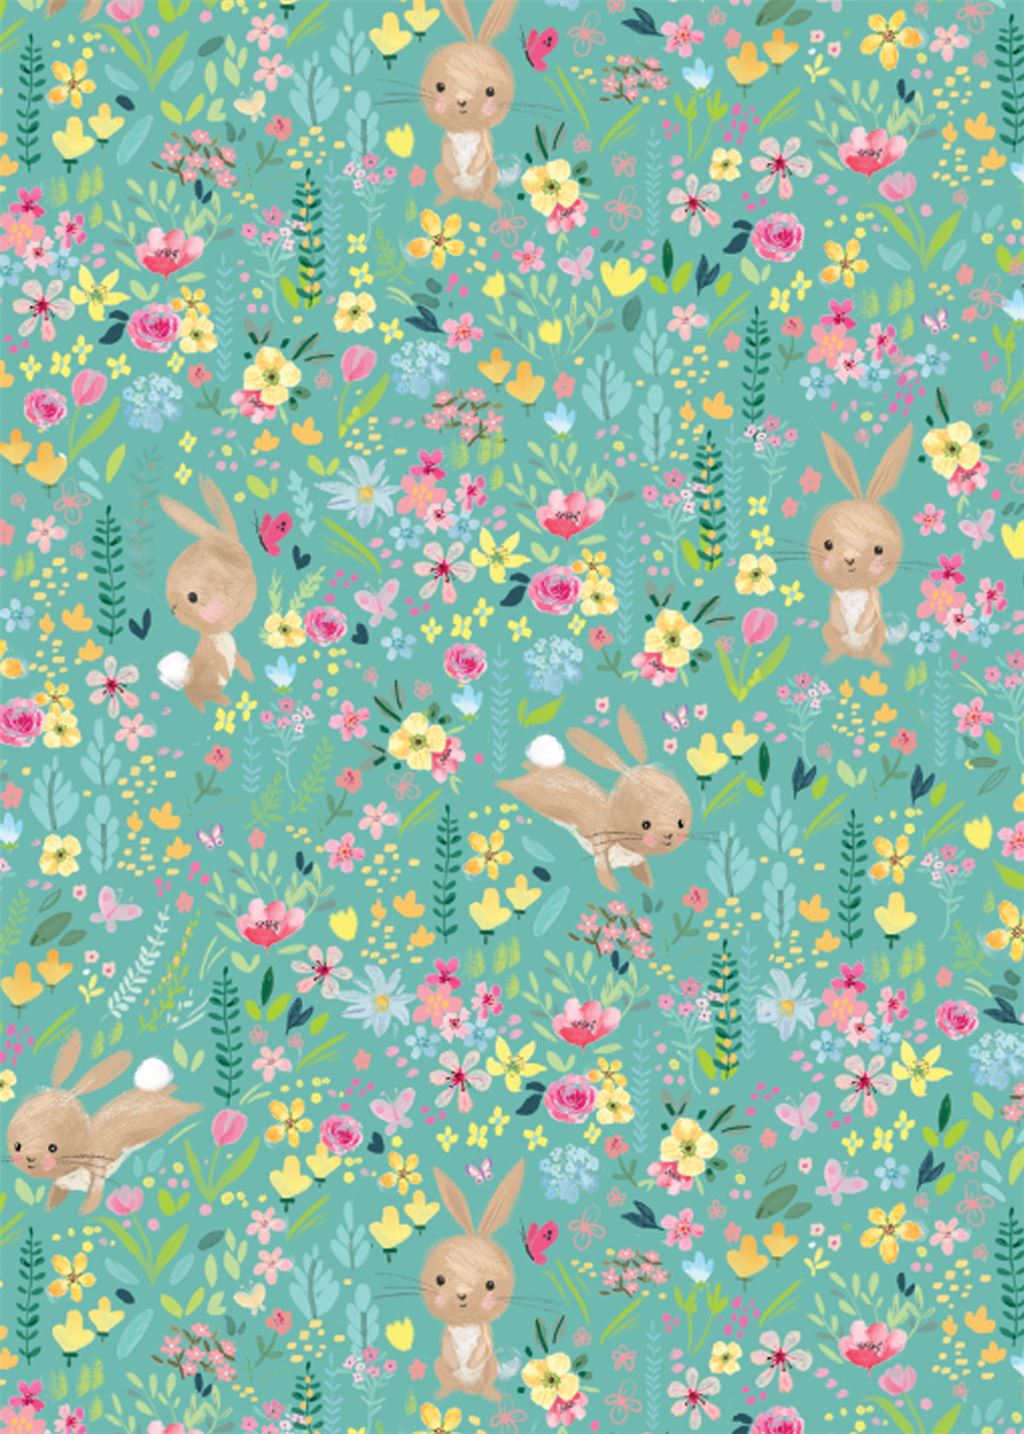 Bunny Meadow wrapping paper